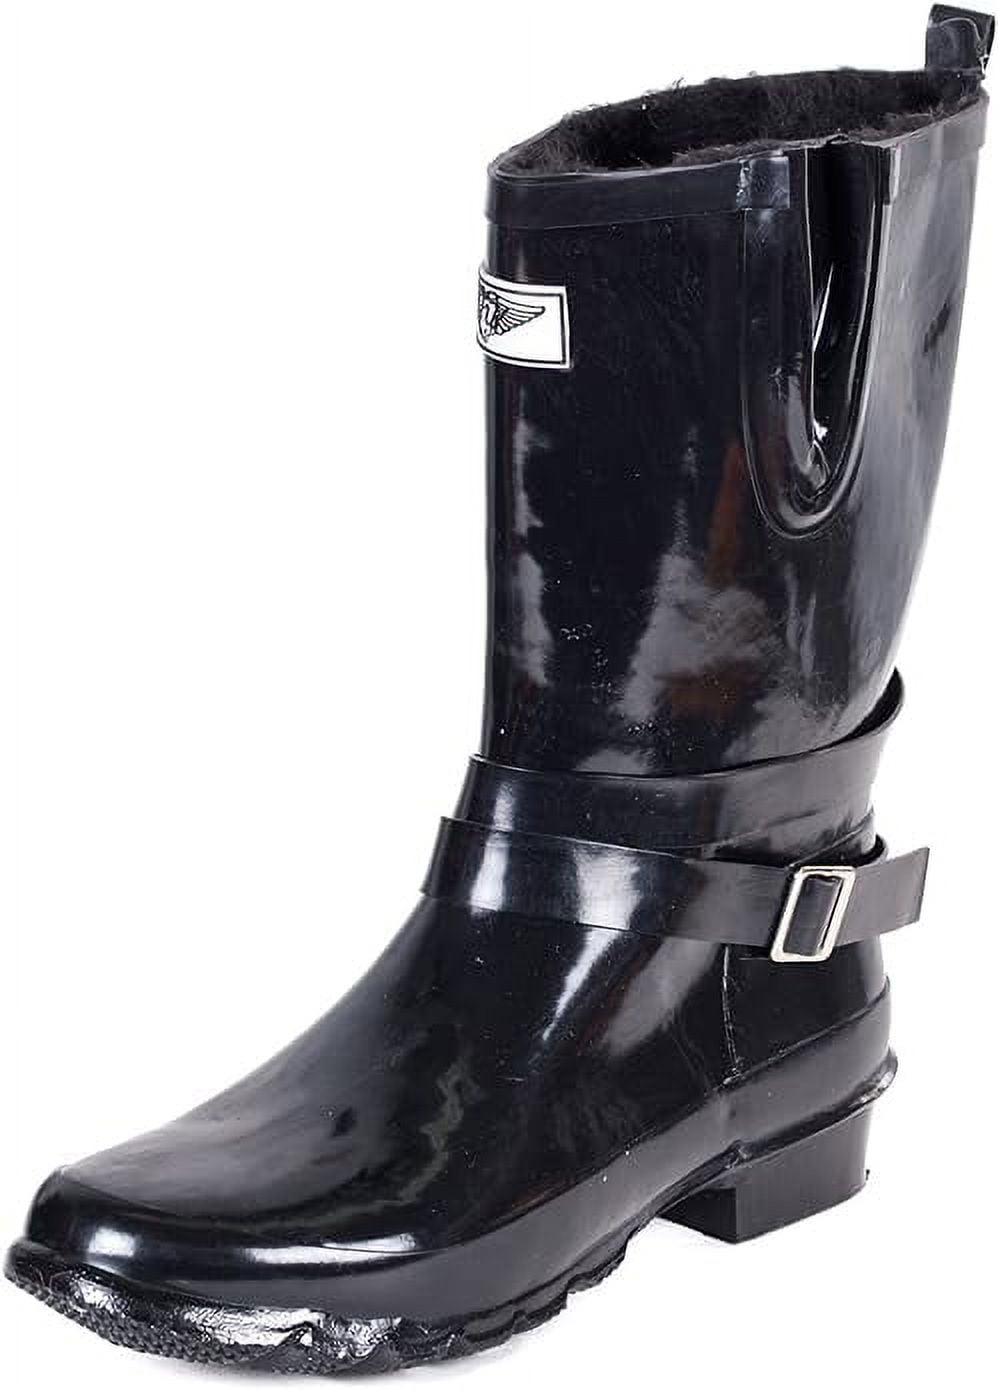 Forever Young Women's Short Strapped with Buckle Rain Boot - Walmart.com